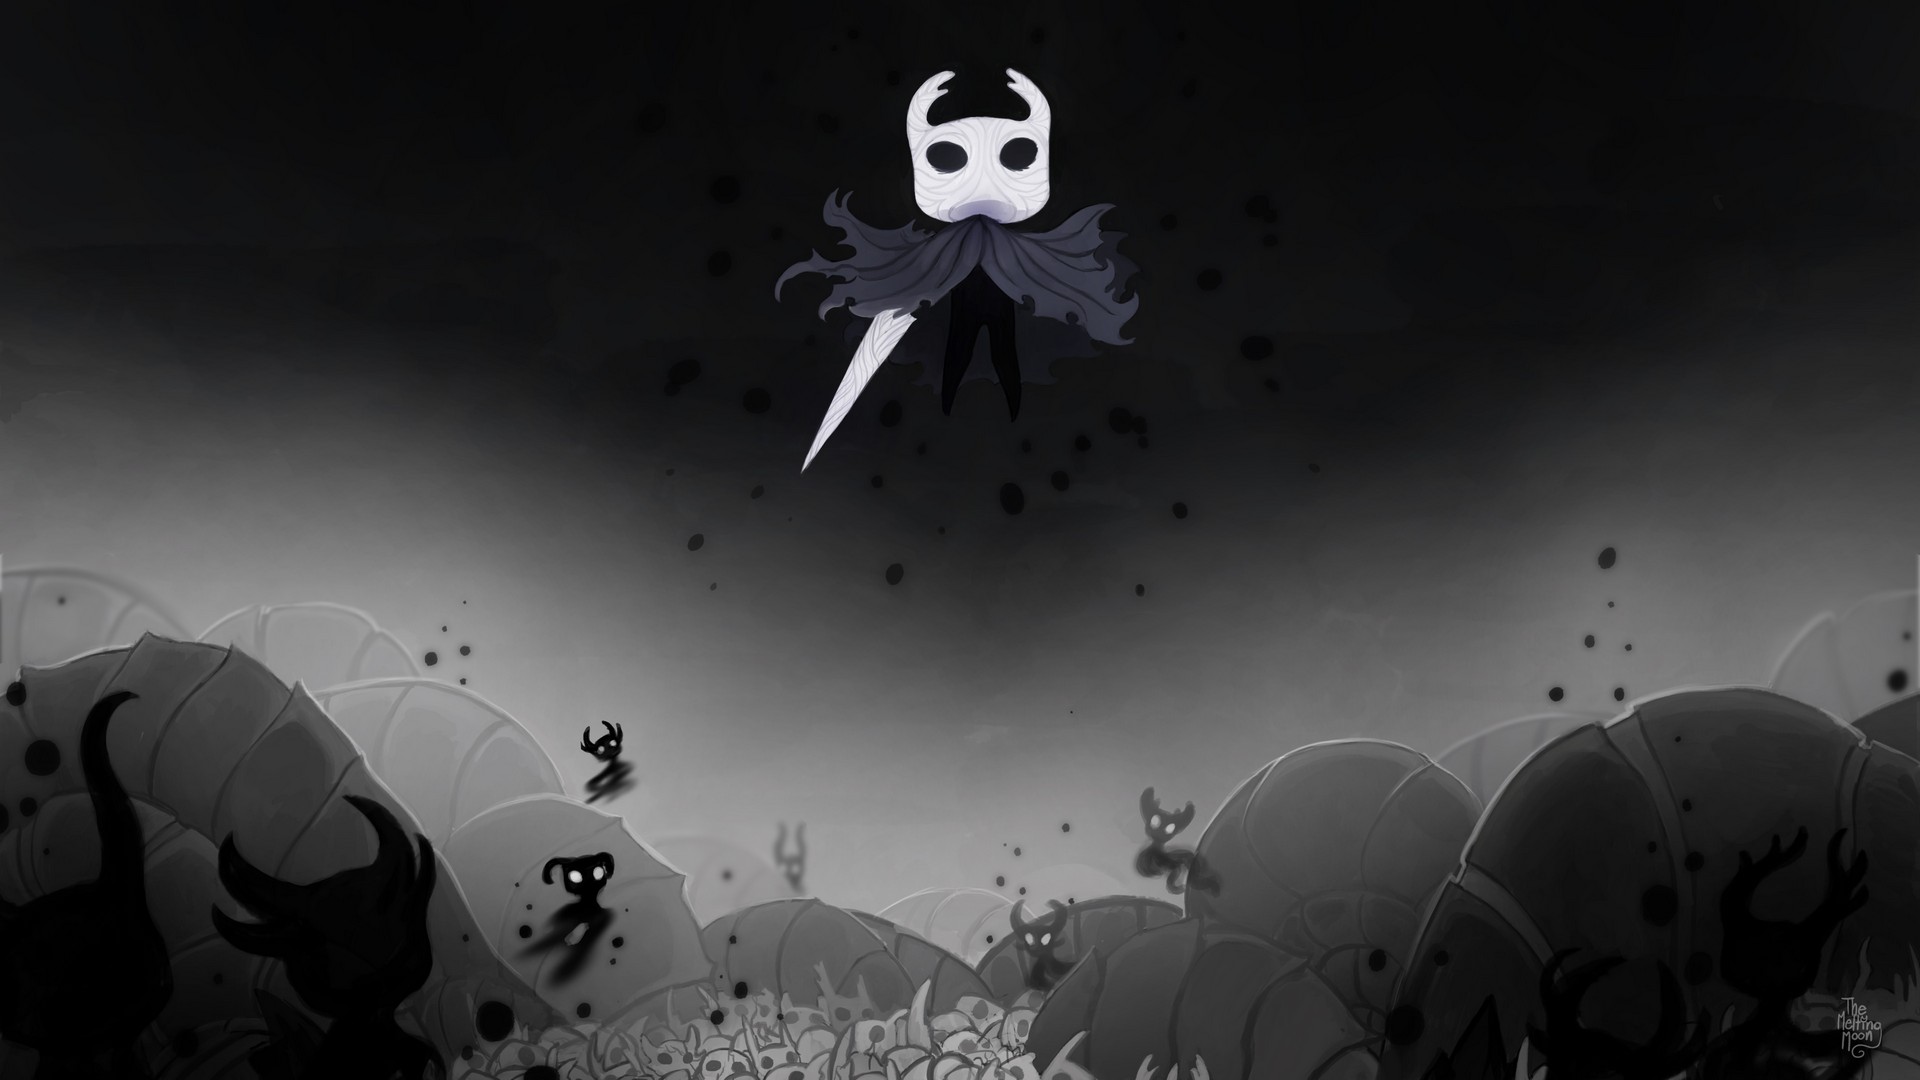 Hollow Knight Game Wallpaper For Desktop with high-resolution 1920x1080 pixel. You can use this wallpaper for your Desktop Computer Backgrounds, Mac Wallpapers, Android Lock screen or iPhone Screensavers and another smartphone device